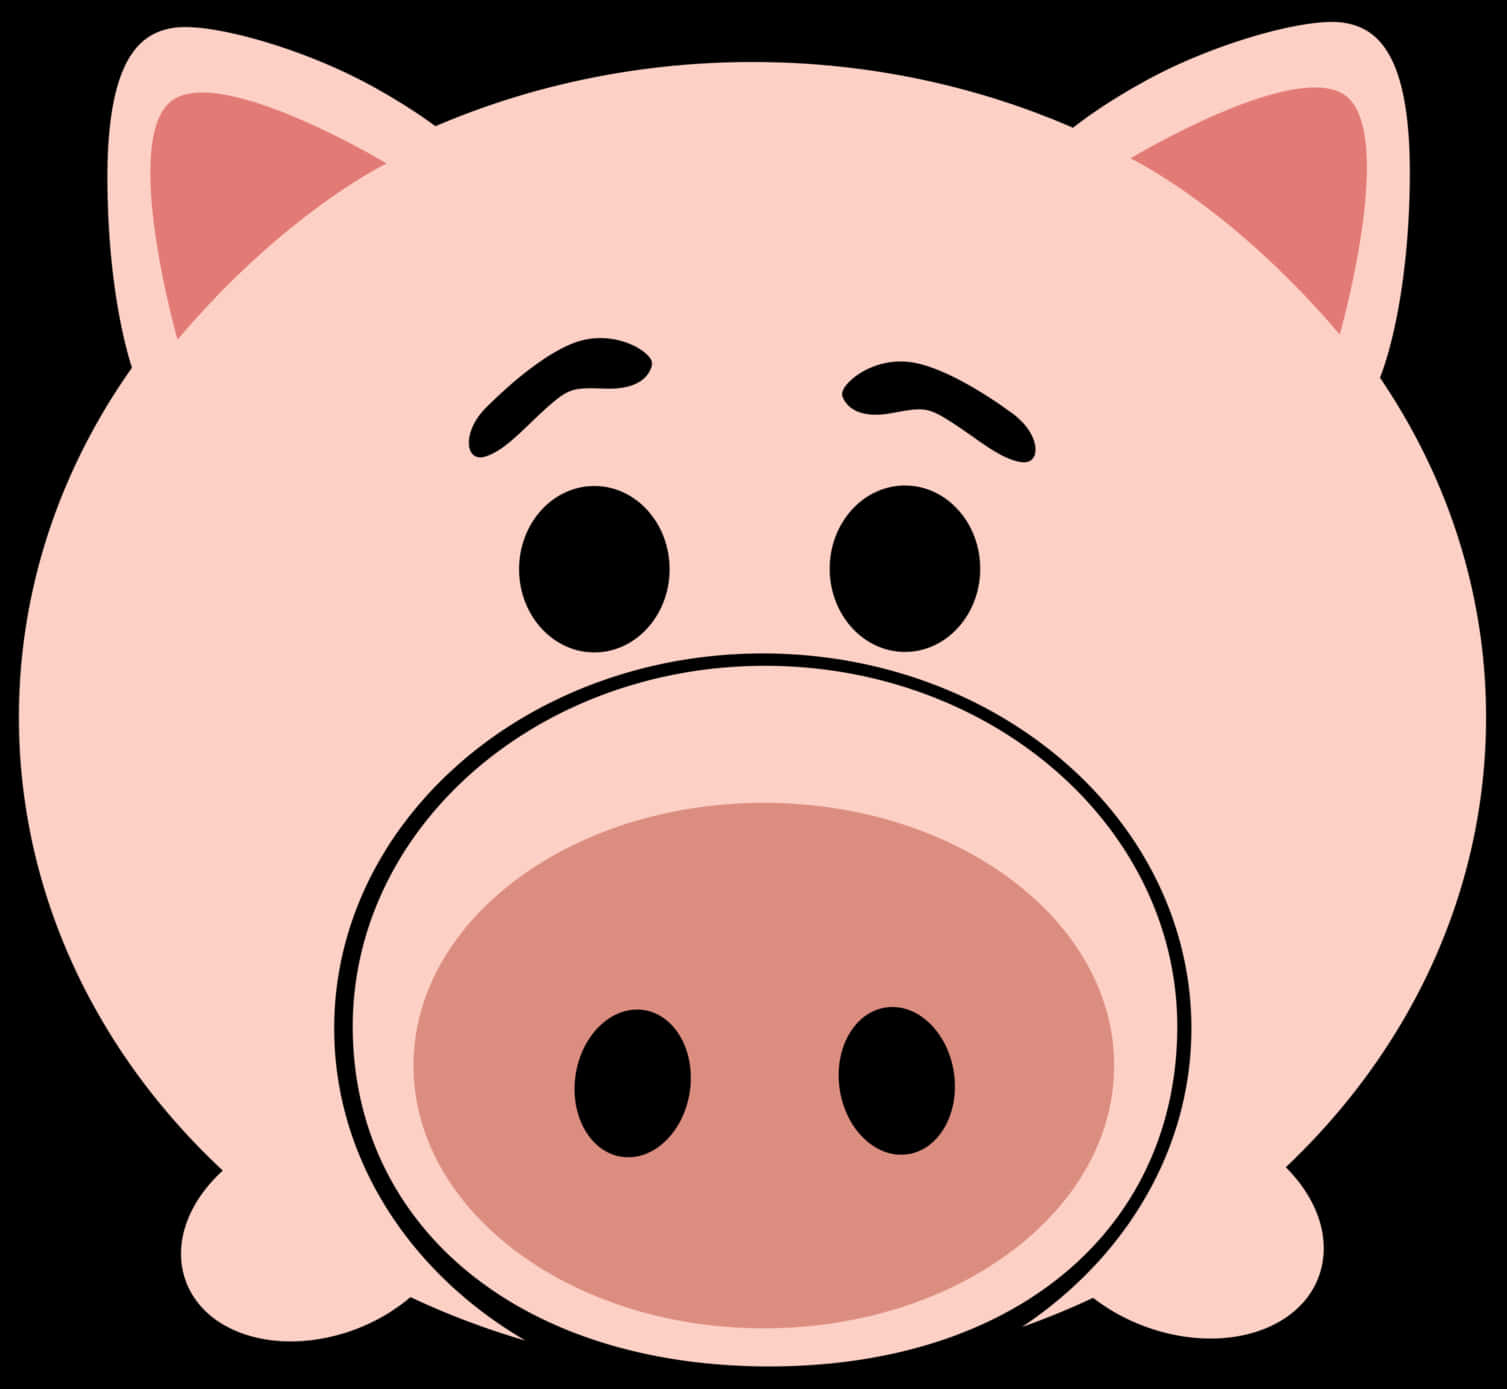 Worried Pig Cartoon Graphic PNG